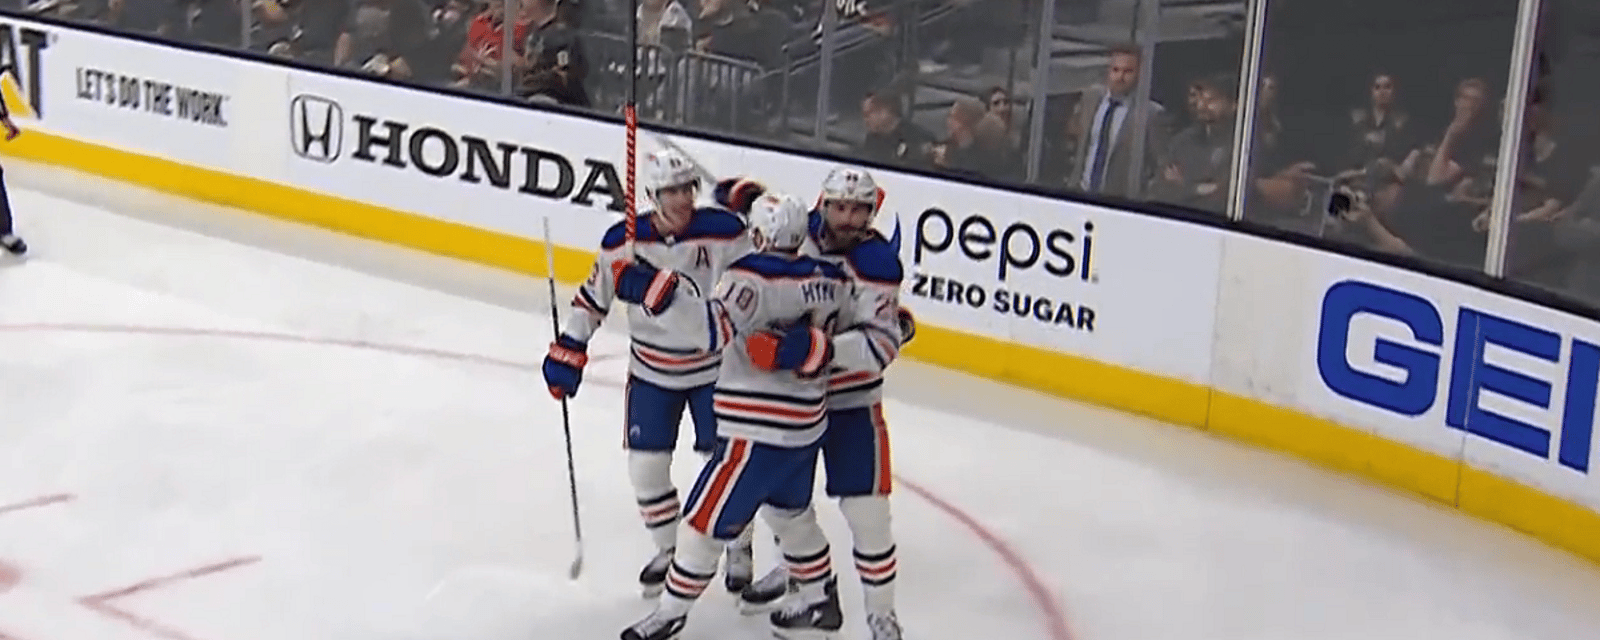 Oilers torch Golden Knights for 4 goals in first period of Game 2.